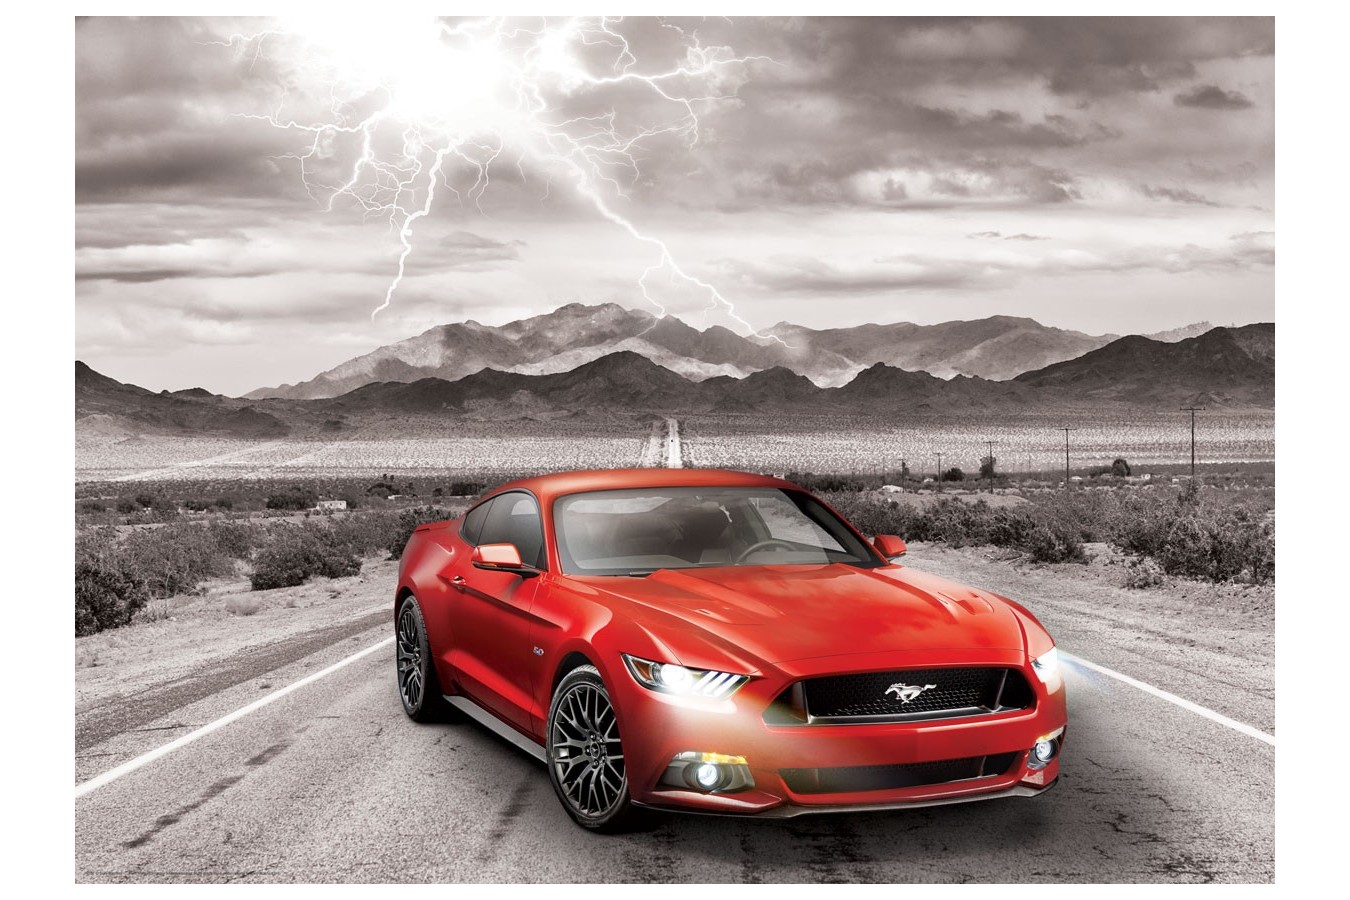 Puzzle Eurographics - 2015 Ford Mustang GT Fifty Years of Power, 1000 piese (6000-0702)